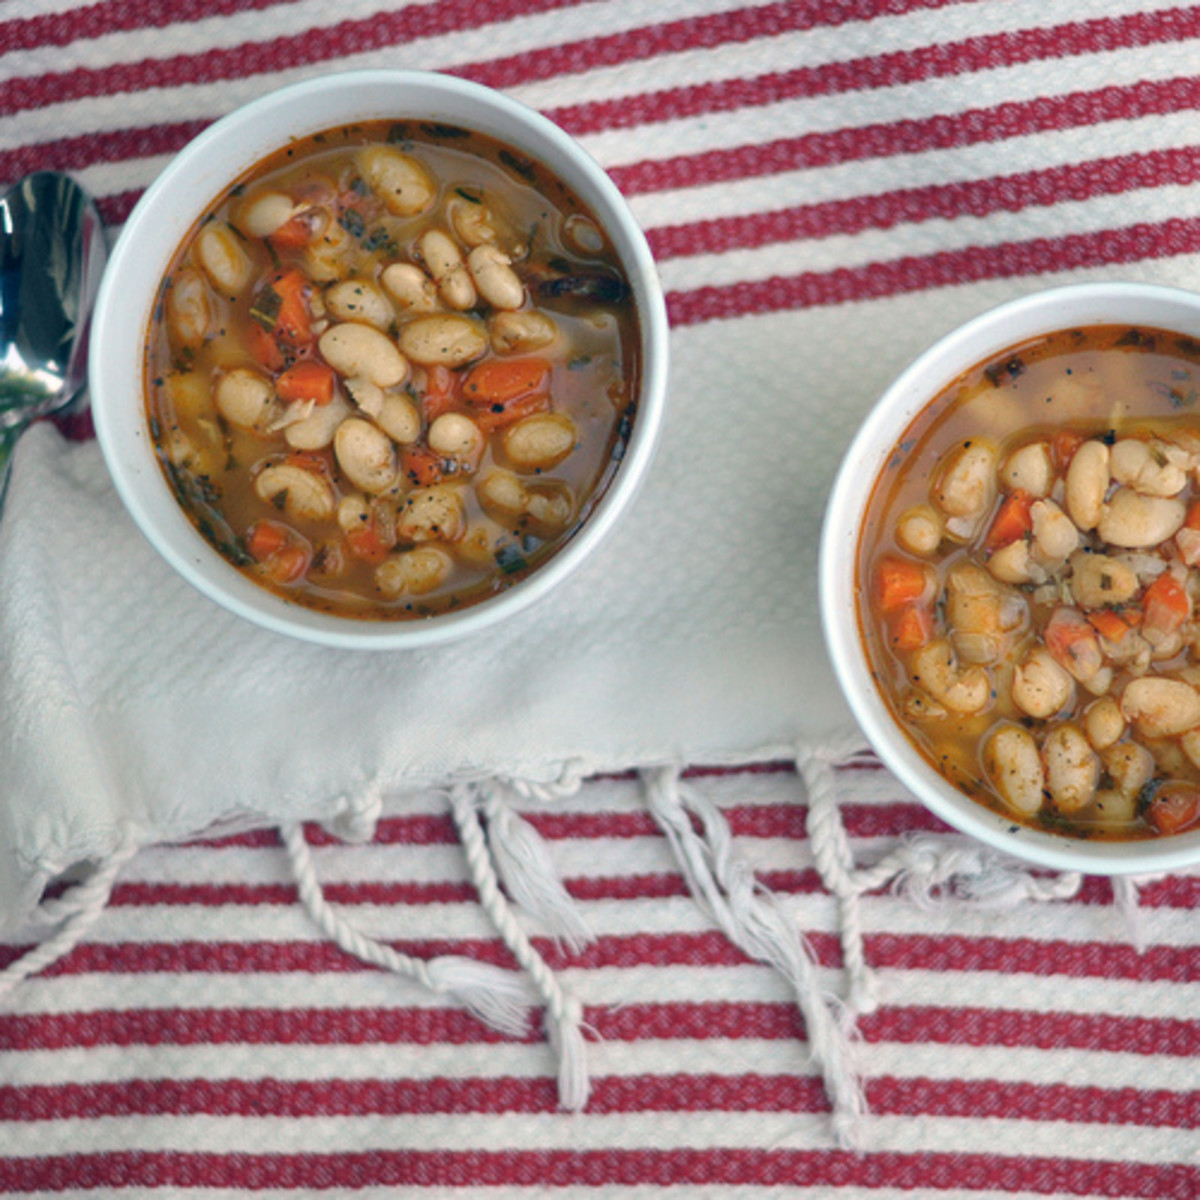 White%20Bean%20Soup%20by%20emmadiscovery%20flickr